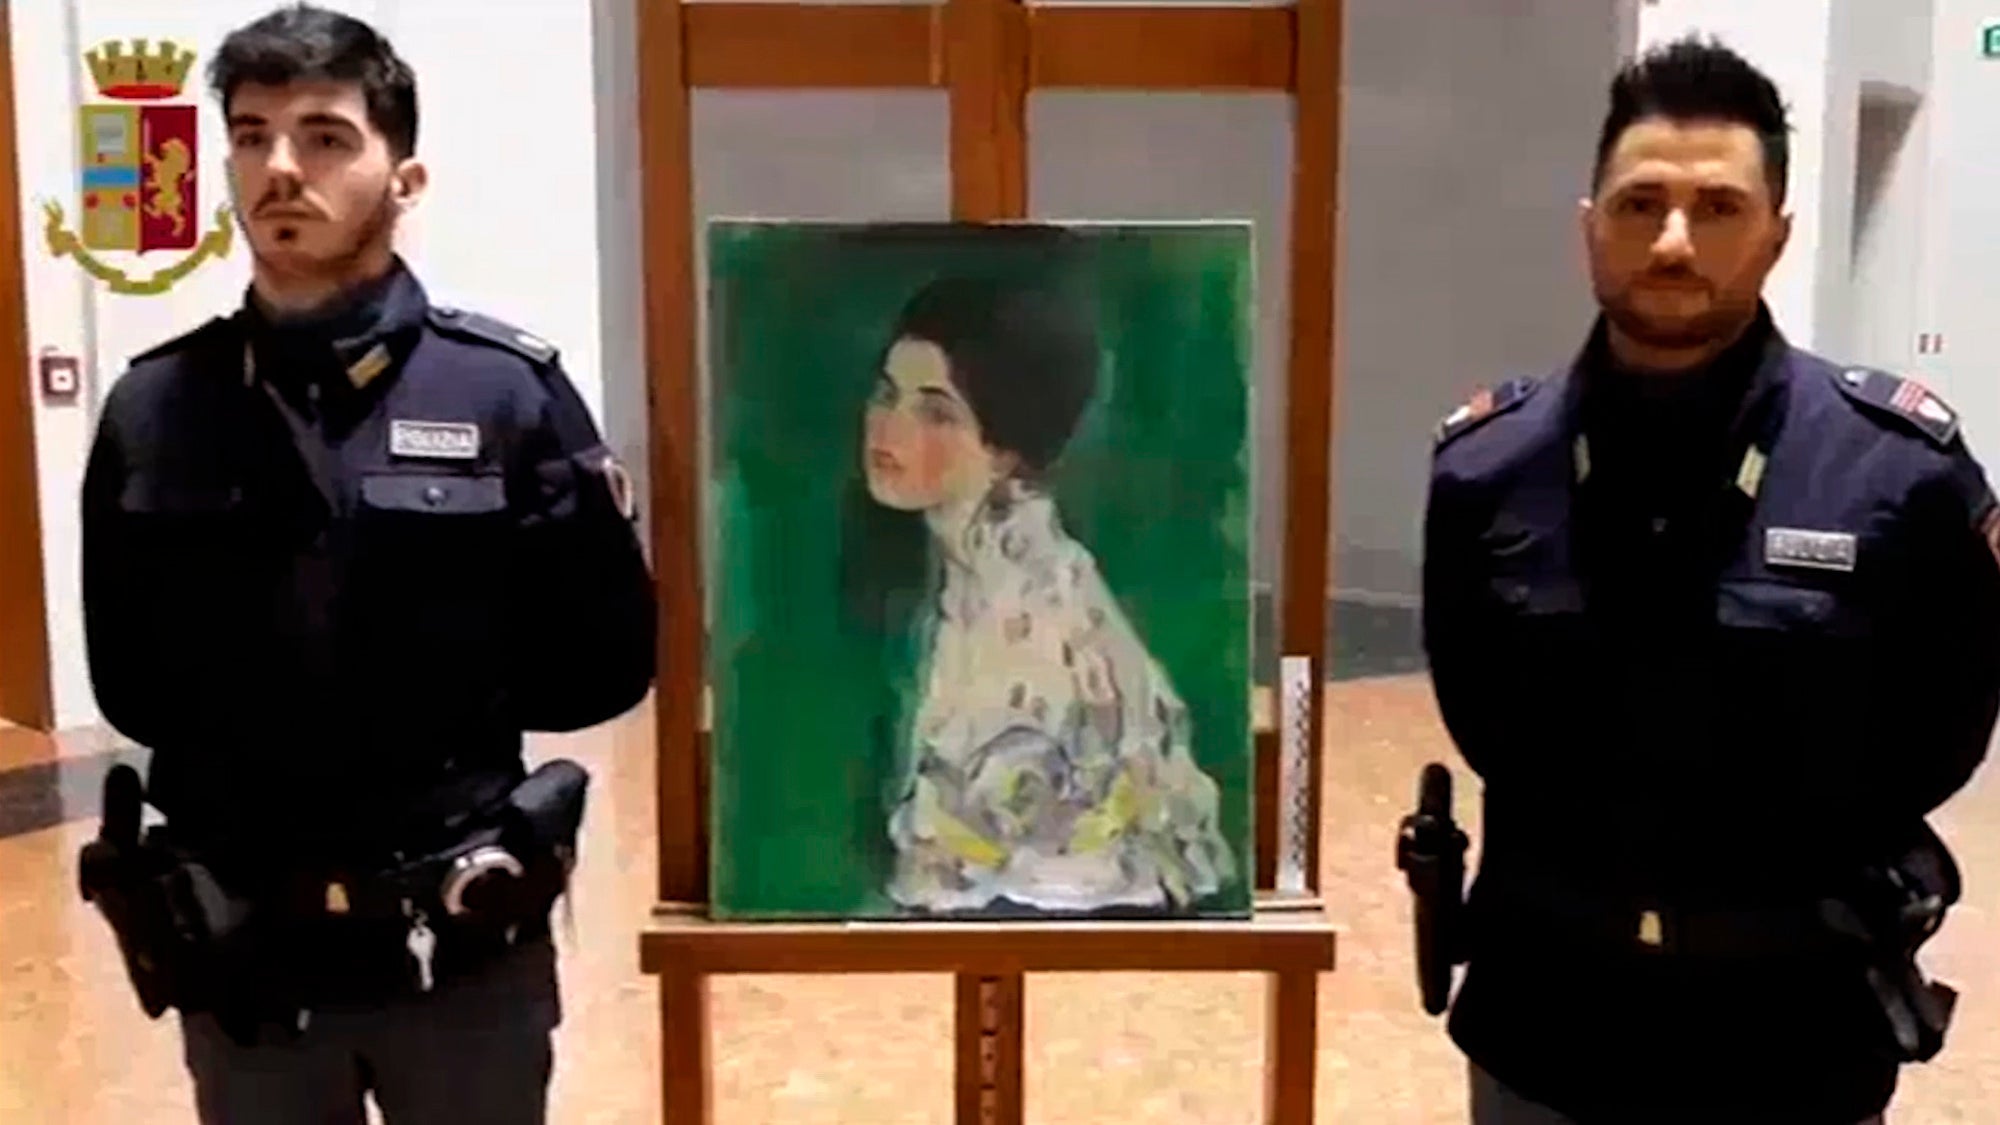 Two police officers stand guard next to a painting – believed to be a stolen artwork by Gustav Klimt – discovered in a cavity in a gallery's walls, in Piacenza, northern Italy